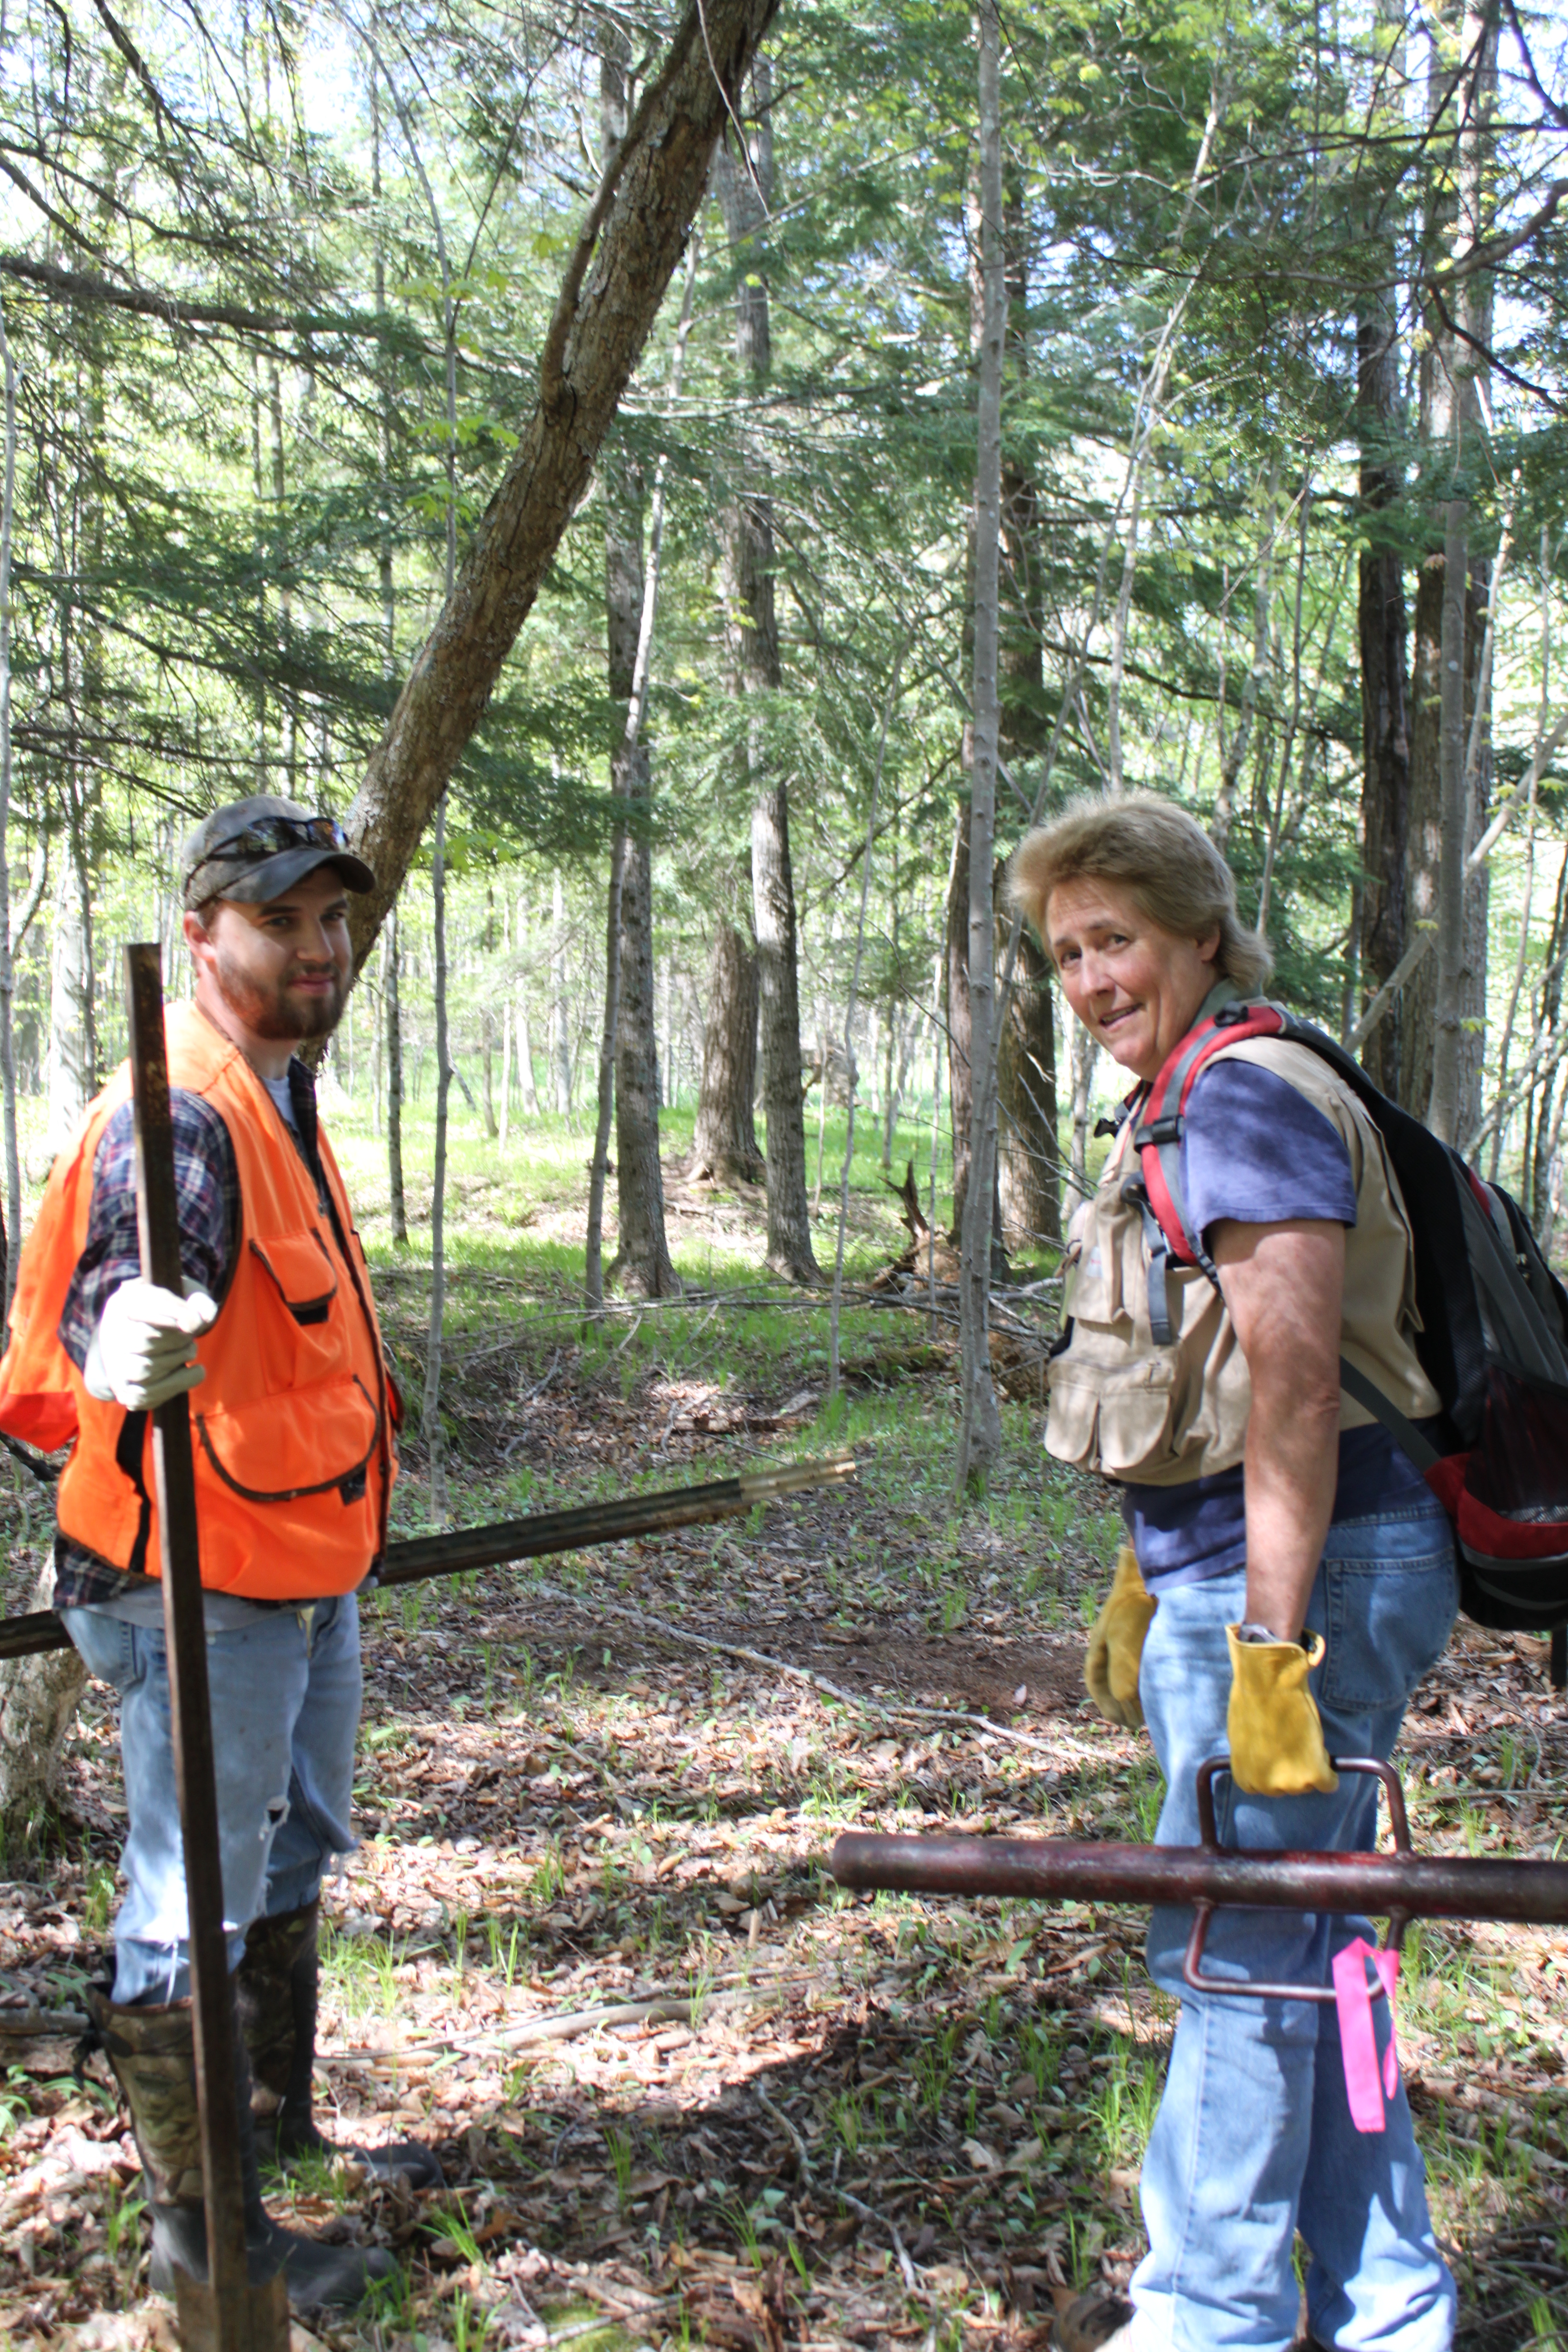 McCullough works with James Wieferich, now a forest health specialist with the Michigan Department of Natural Resources, on EAB research in a forest in Mecosta County.